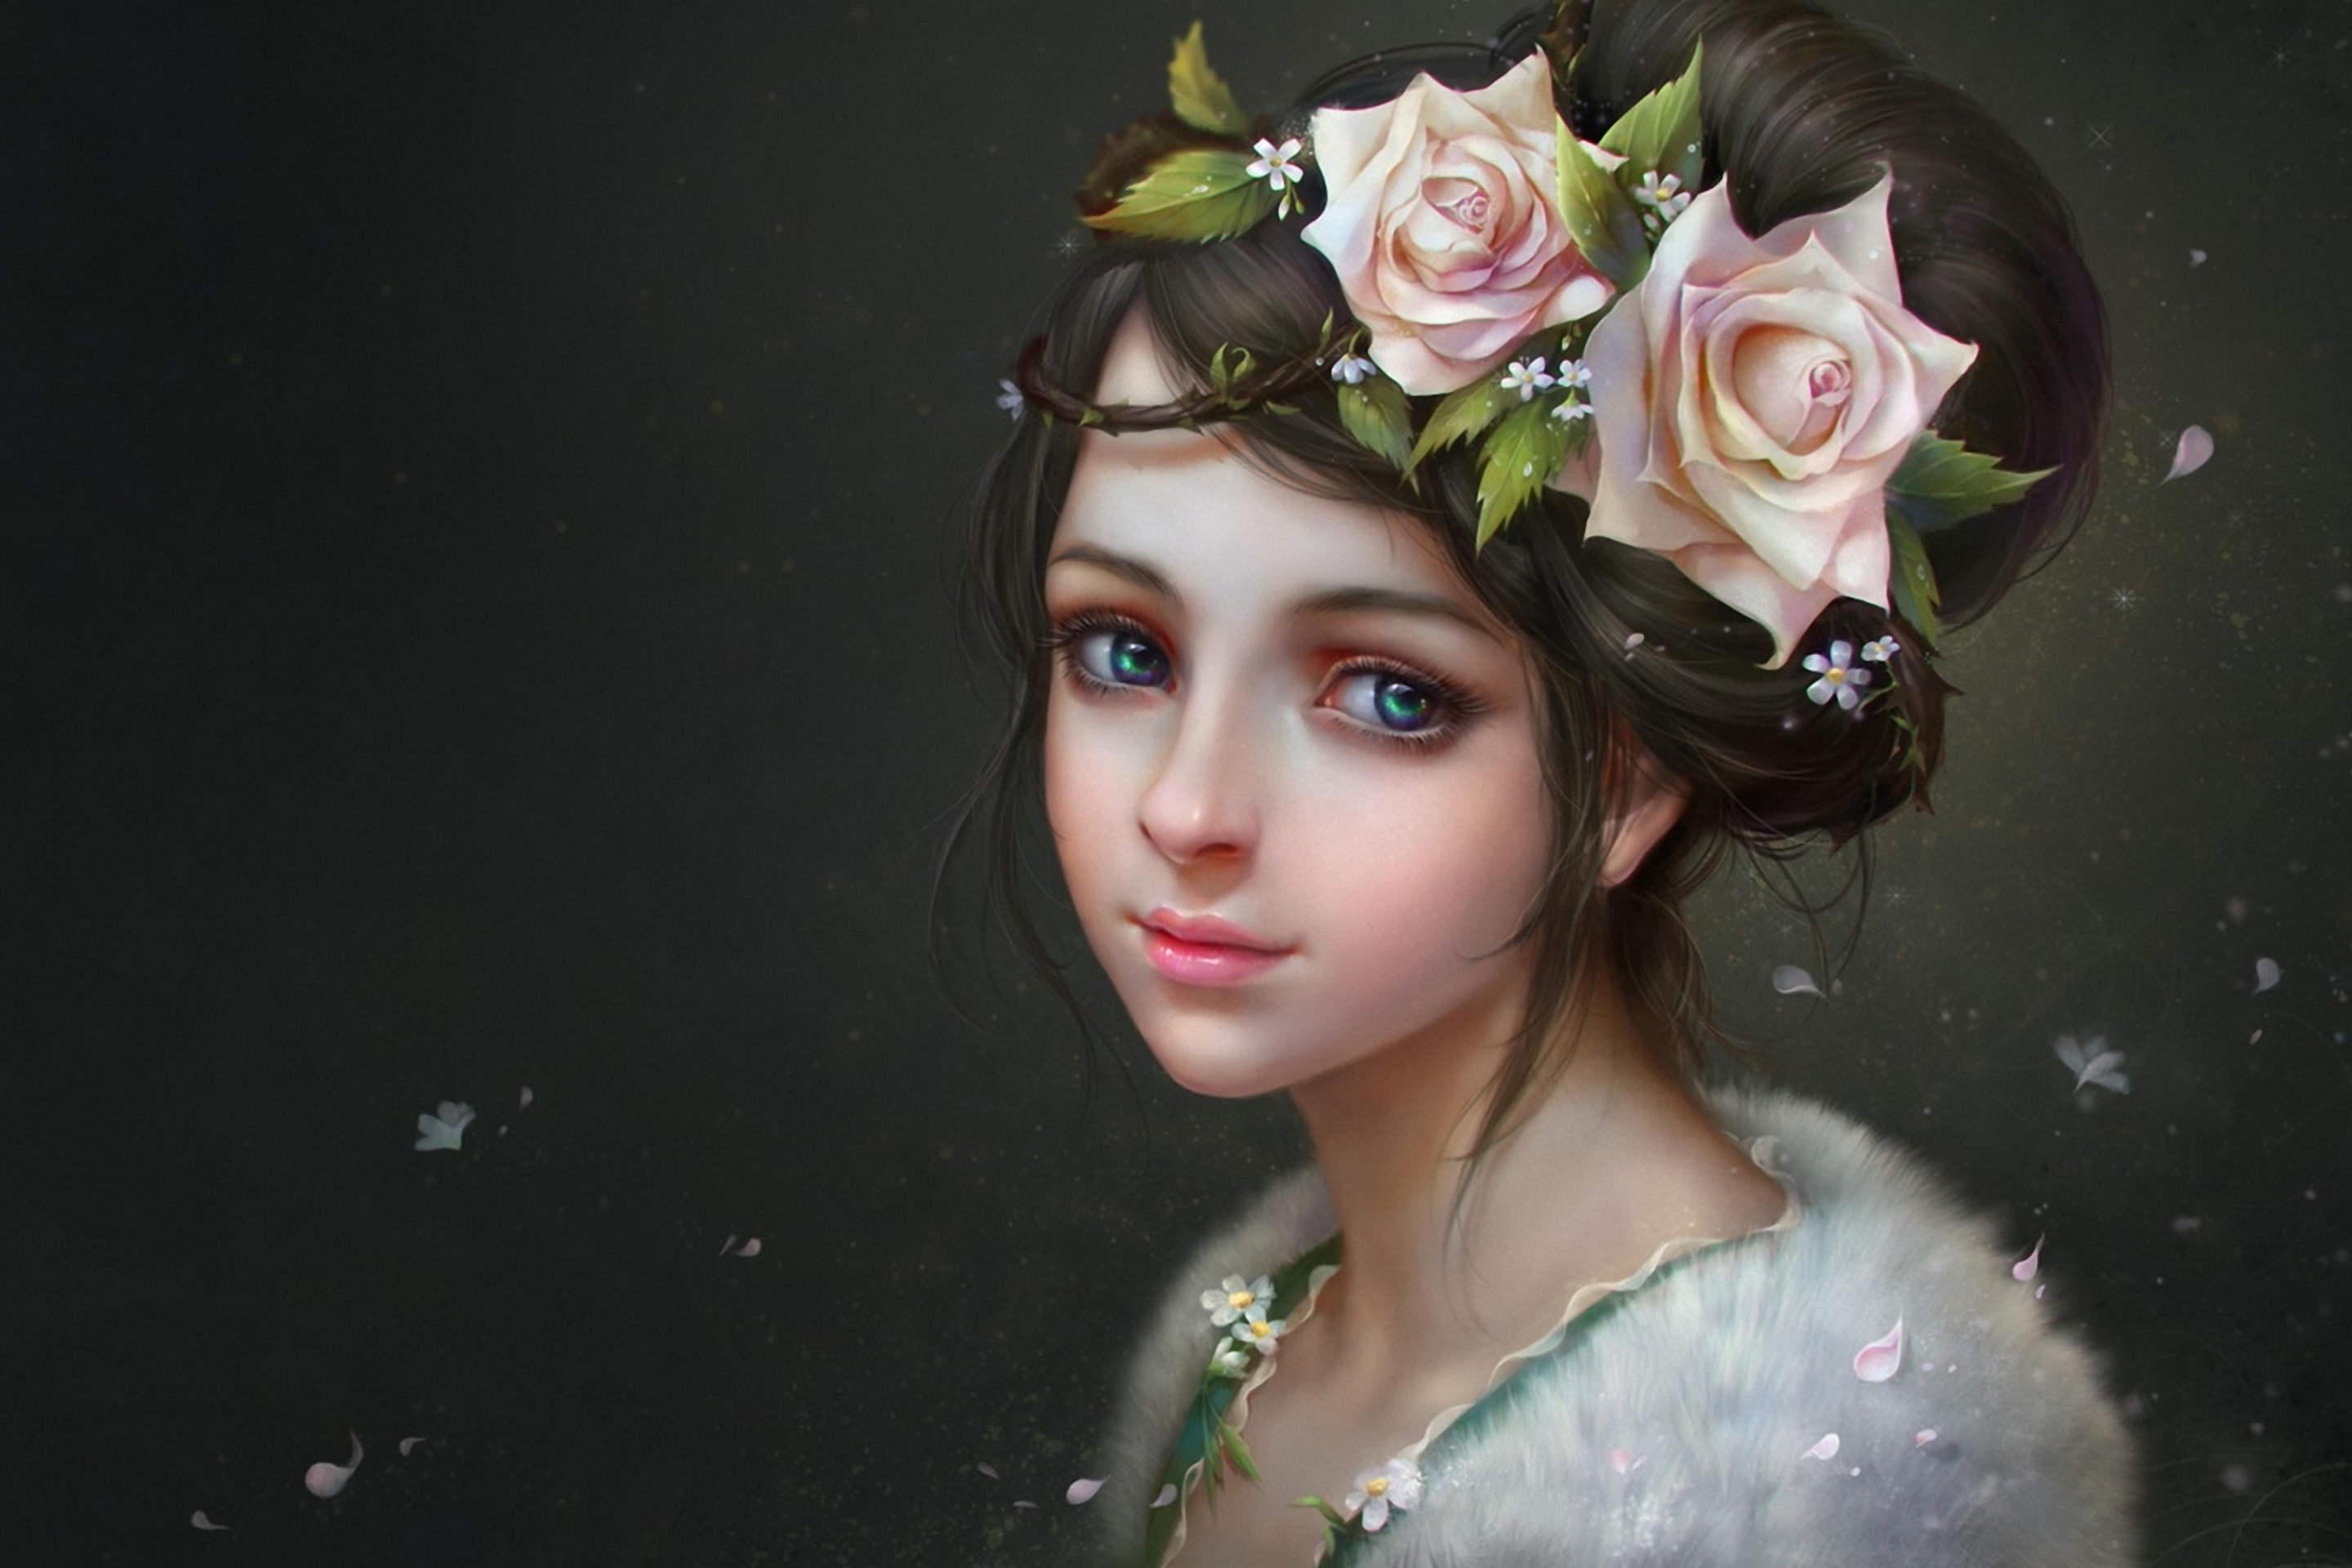 Обои Girl With Roses In Her Hair Painting 2880x1920